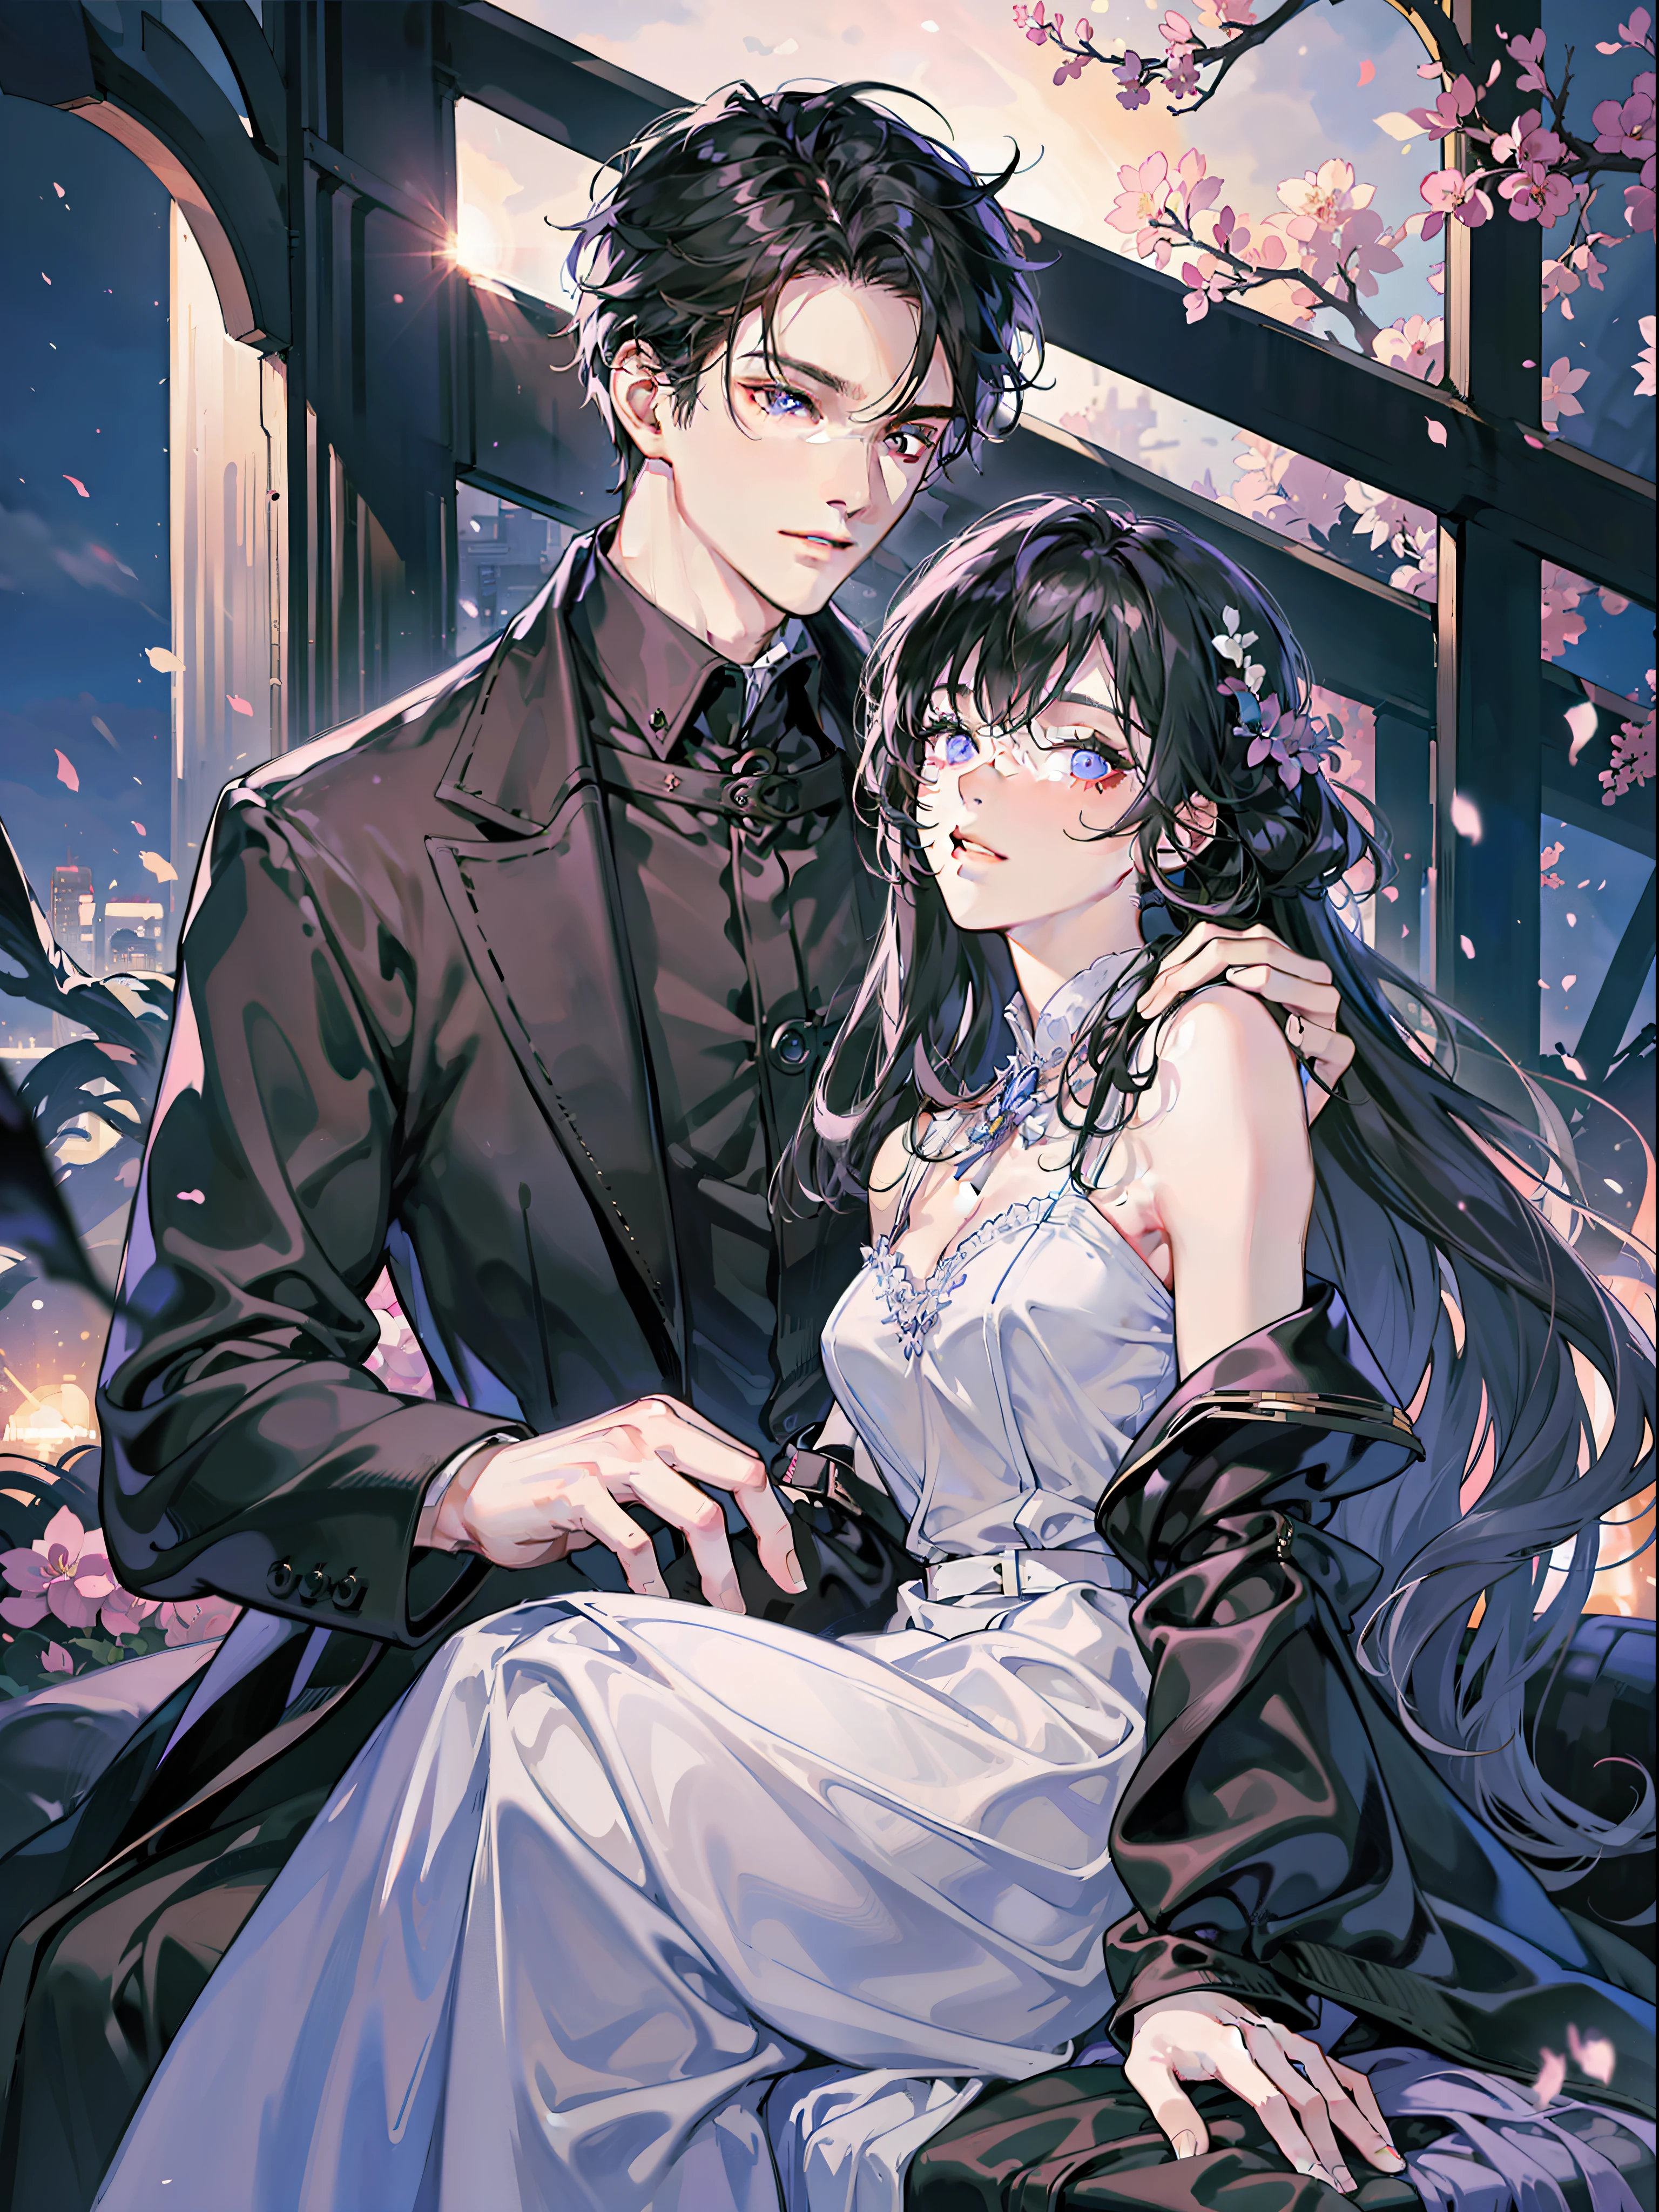 A high resolution，couple，Look at each other，Handsome men and beautiful women，Girls shawl long hair，Lilac dress，Short black hair for boys，black shirt，night scene，Urban men and women，optic，The atmosphere is exquisite，Clear facial features，Detail optimization，Hand optimization